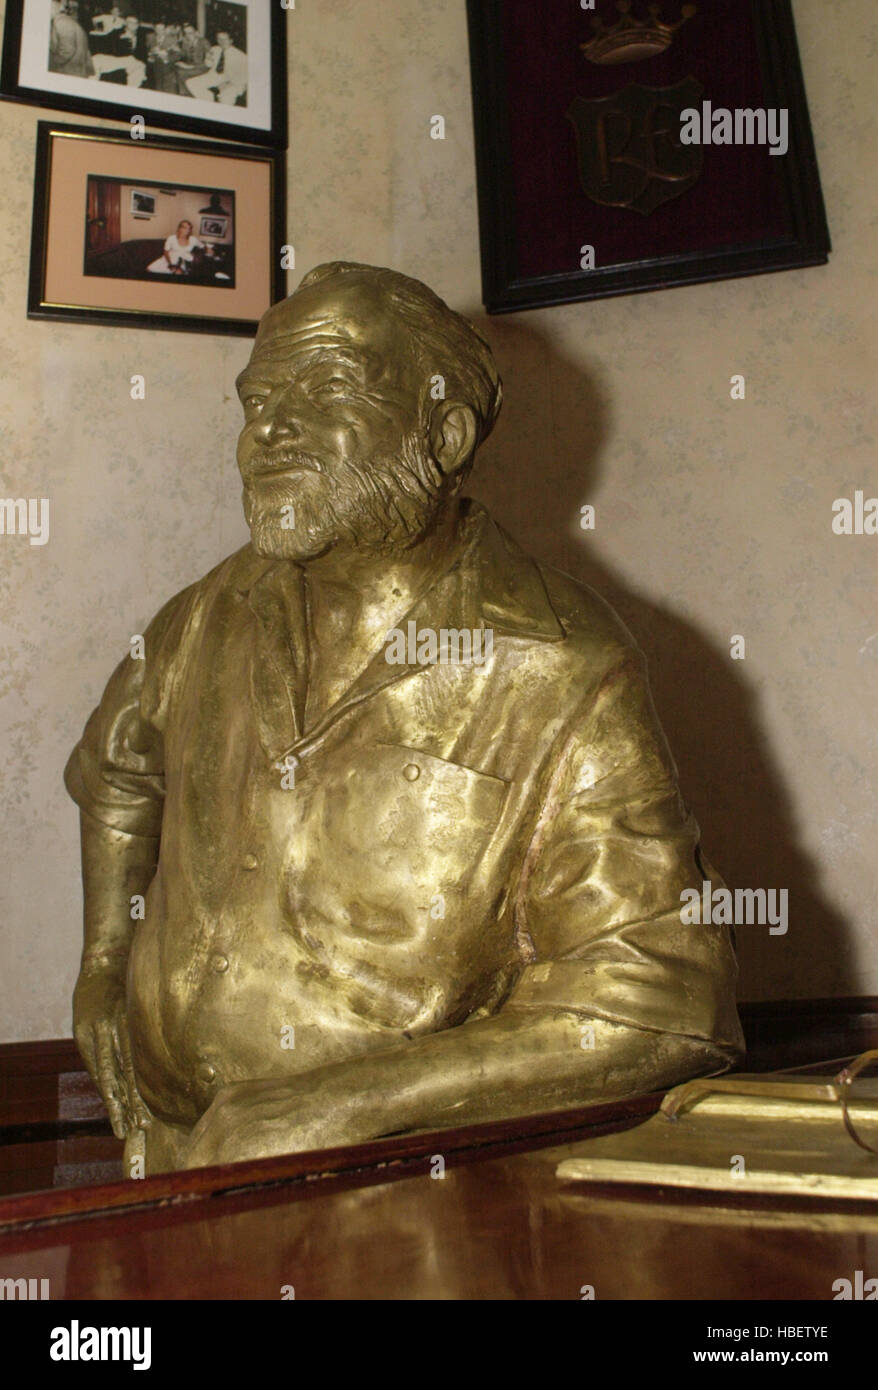 Photo File/ HAVANA, CUBA: Ernest Hemingway statue is seen in the Restorant 'Floridita' to take place frequented drink 'Daiquiri'.  American group led by U.S. Rep. James McGovern, a Massachusetts Democrat, signed an agreement to collaborate on the restoration and preservation of 2,000 letters, 3,000 personal photographs and some draft fragments of novels and stories that were kept in the humid basement of Finca de Vigia, the villa outside Havana where Hemingway lived from 1939-1960. Funded by the Rockefeller Foundation, the joint effort by the New York-based Social Science Research Council and Stock Photo